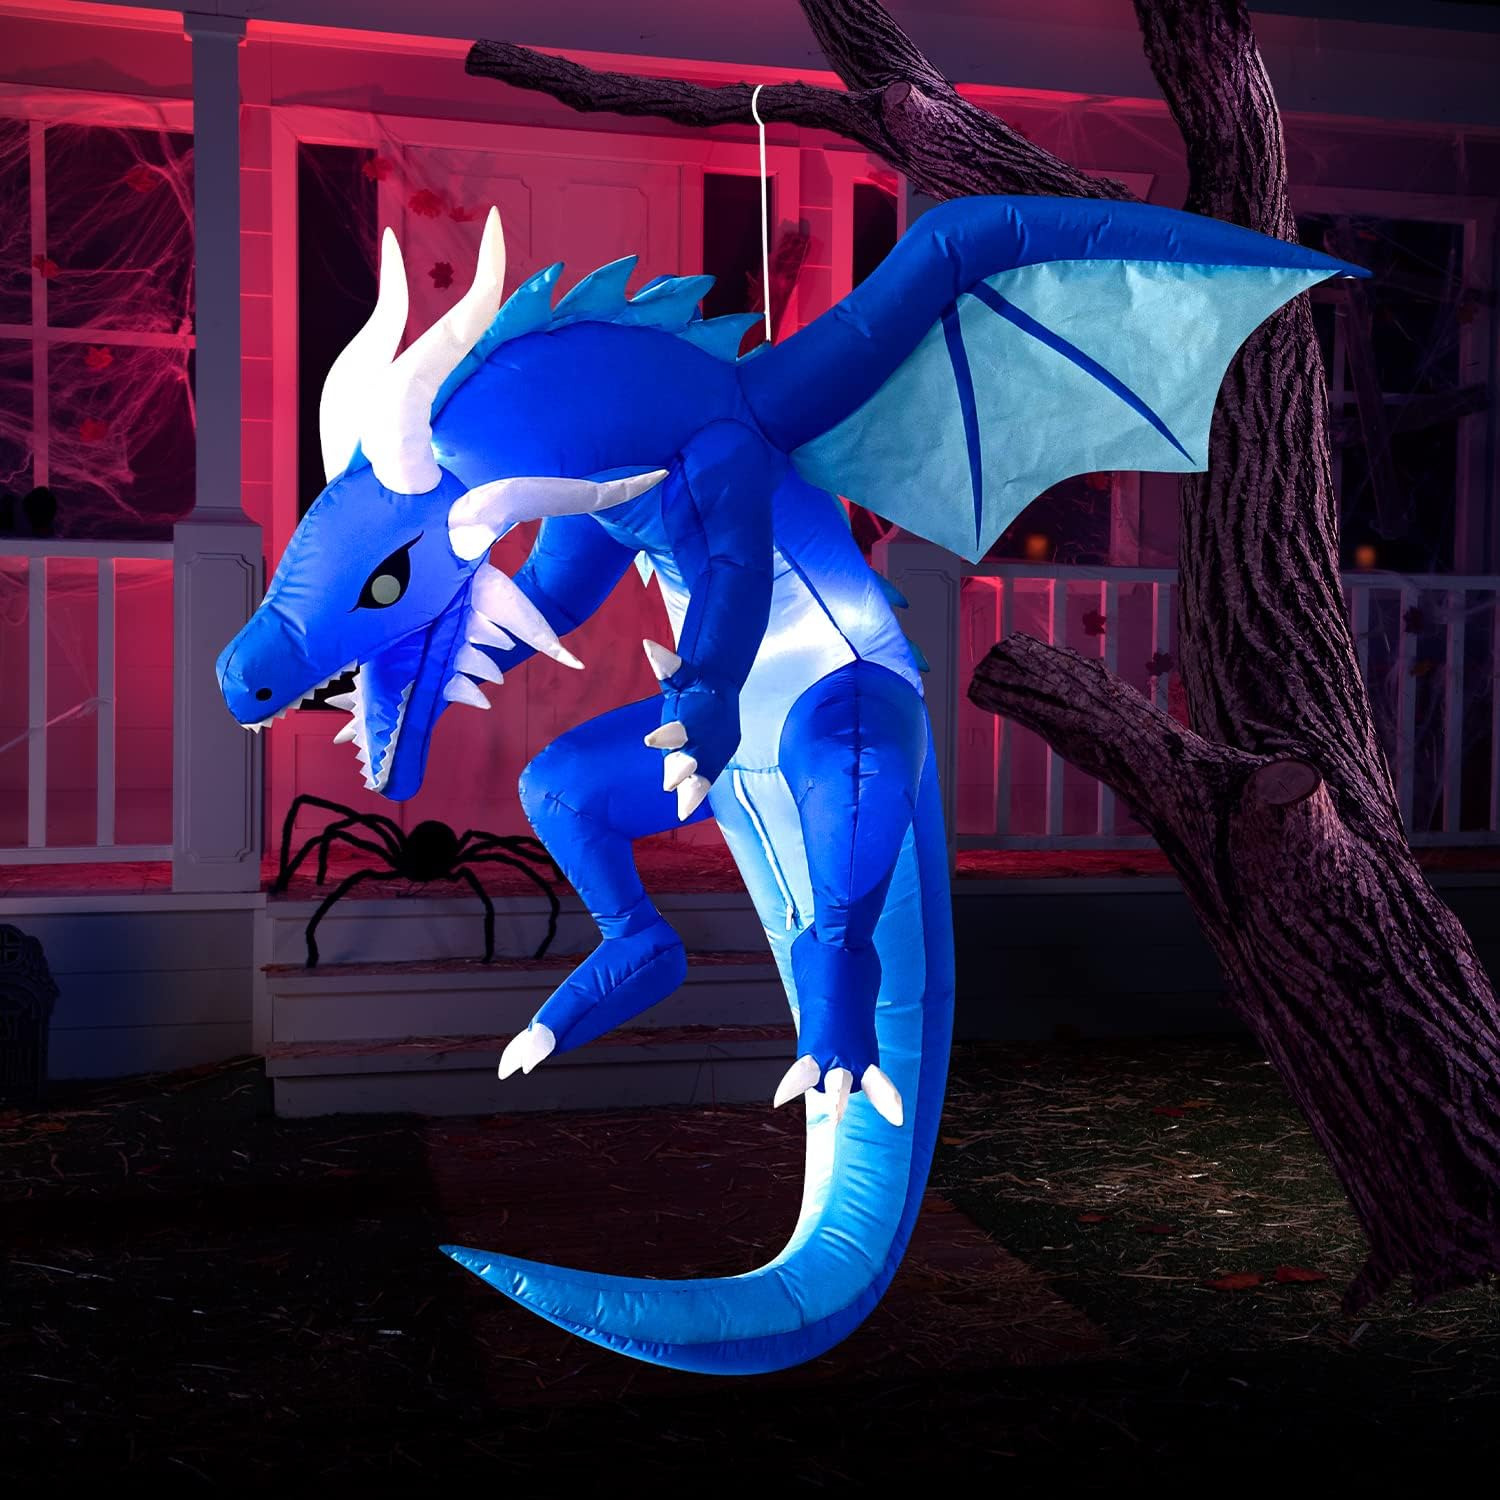 5 FT Tall Halloween Inflatable Hanging Ice Dragon with Build-In Leds, Blow up Fl